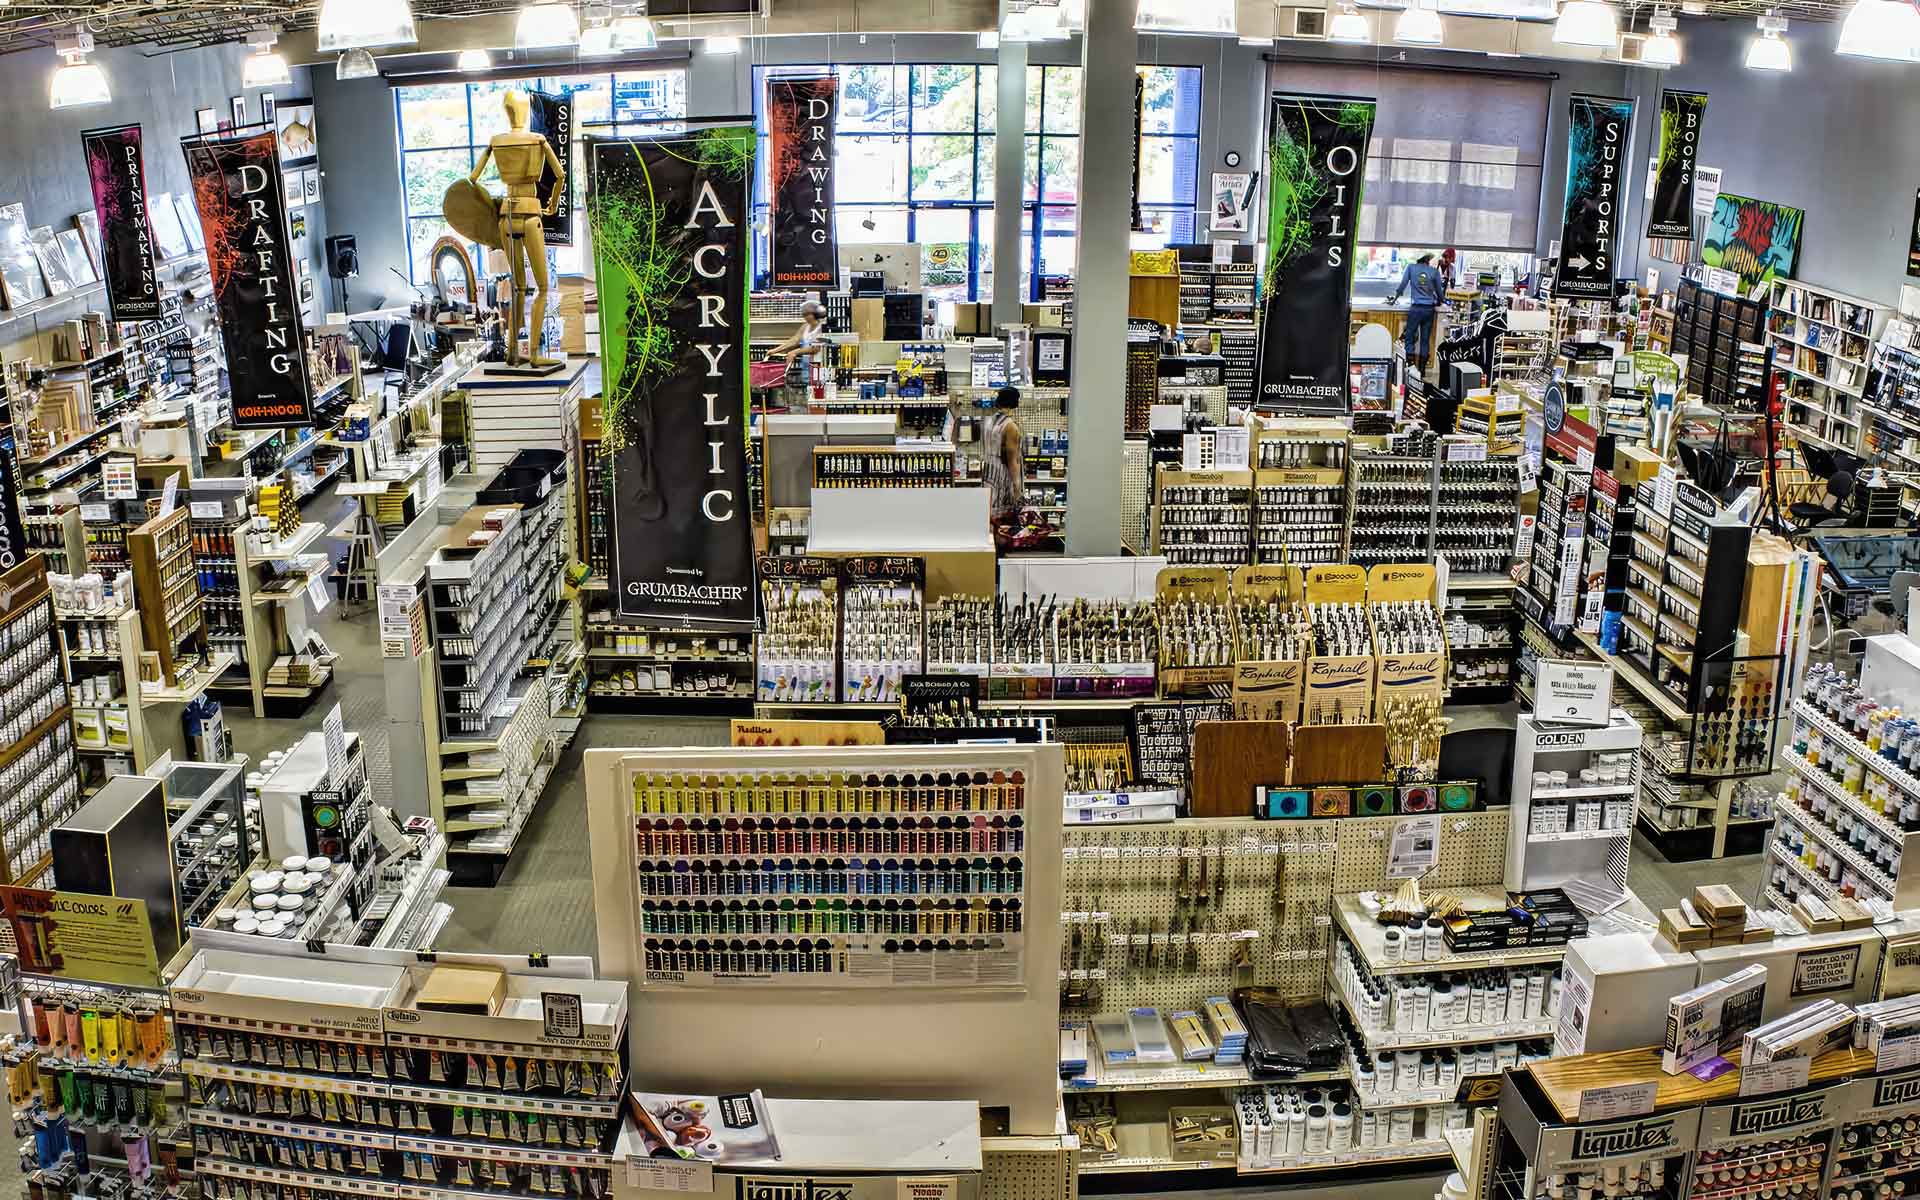 “Coolest Art Supply Store EVER!”